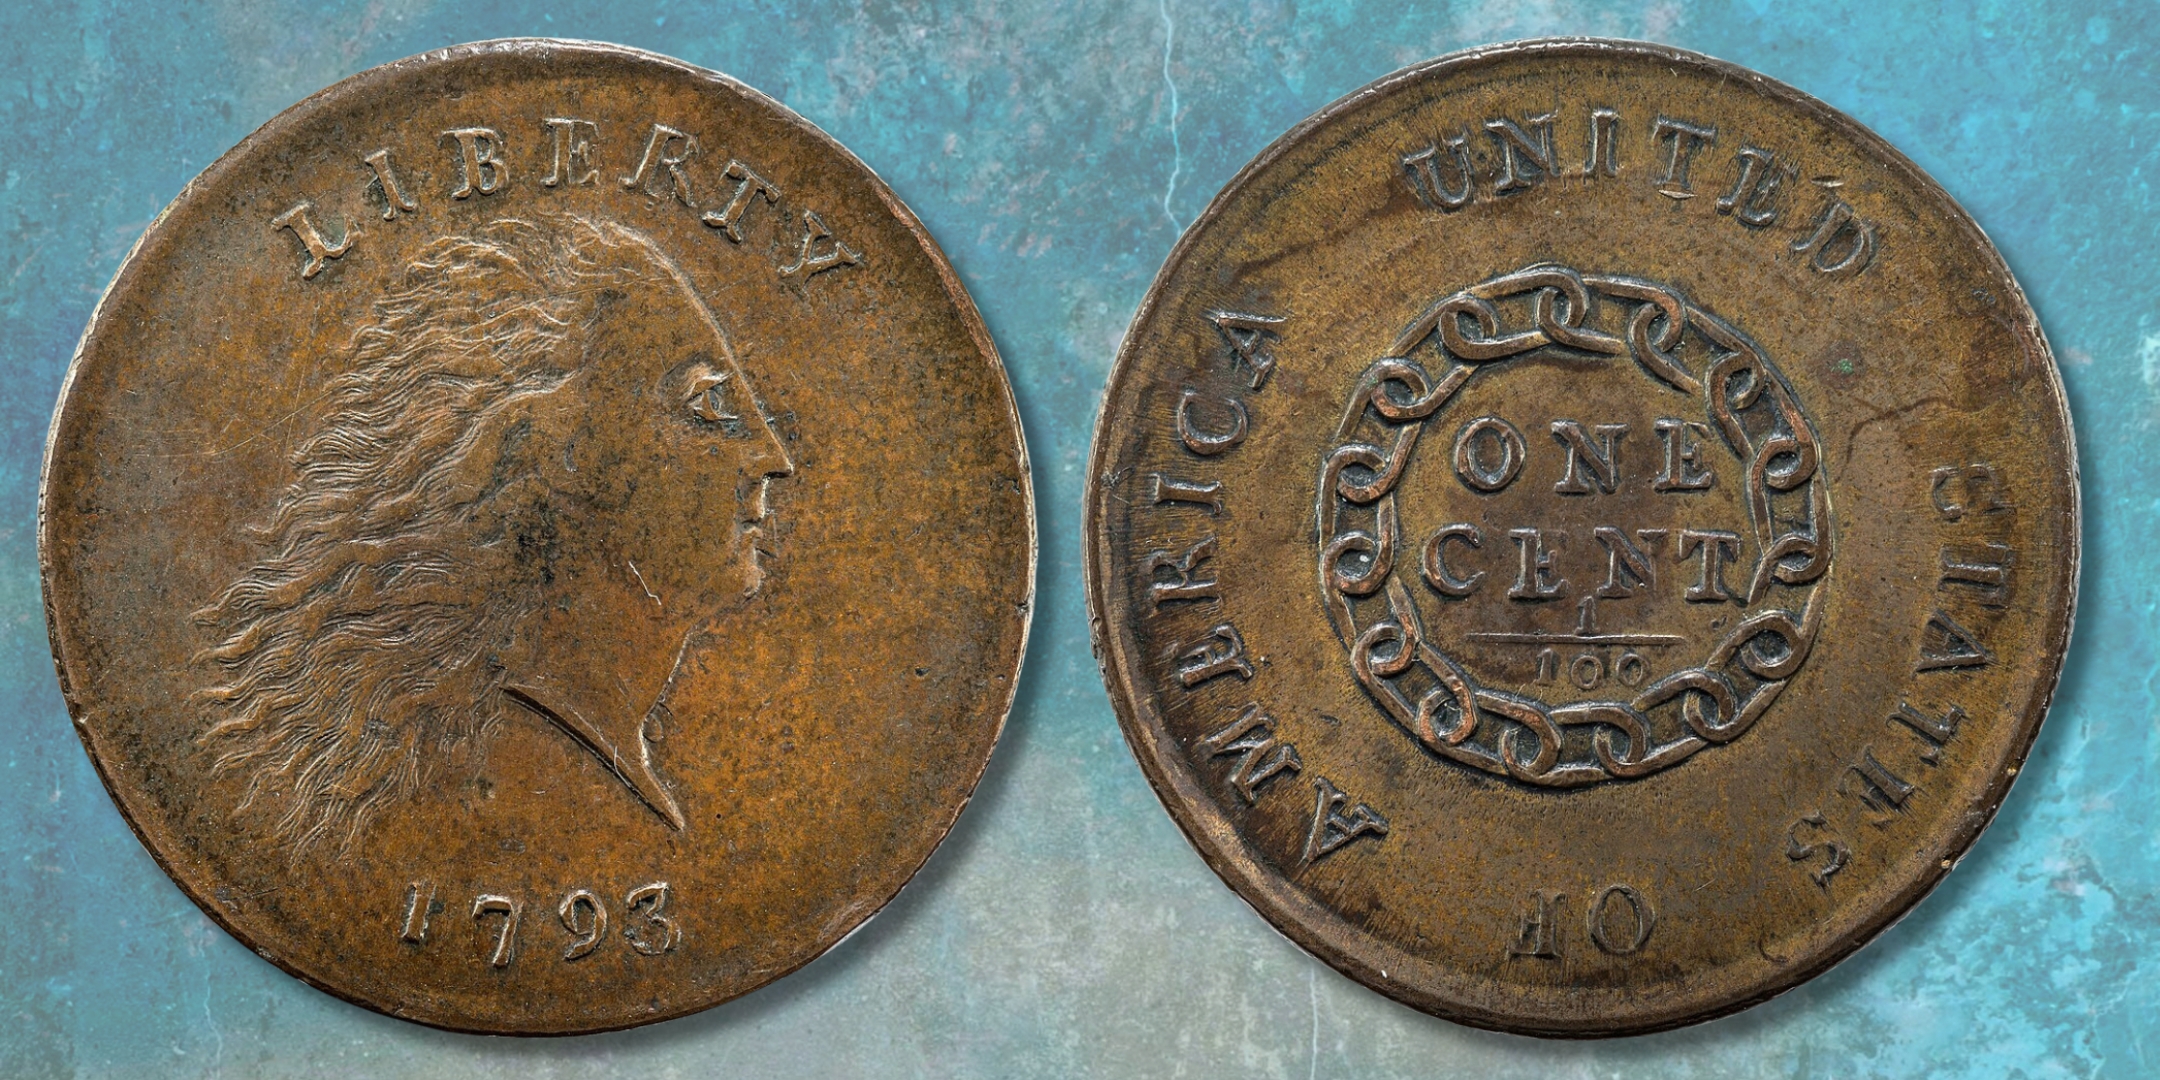 1793 flowing hair cent